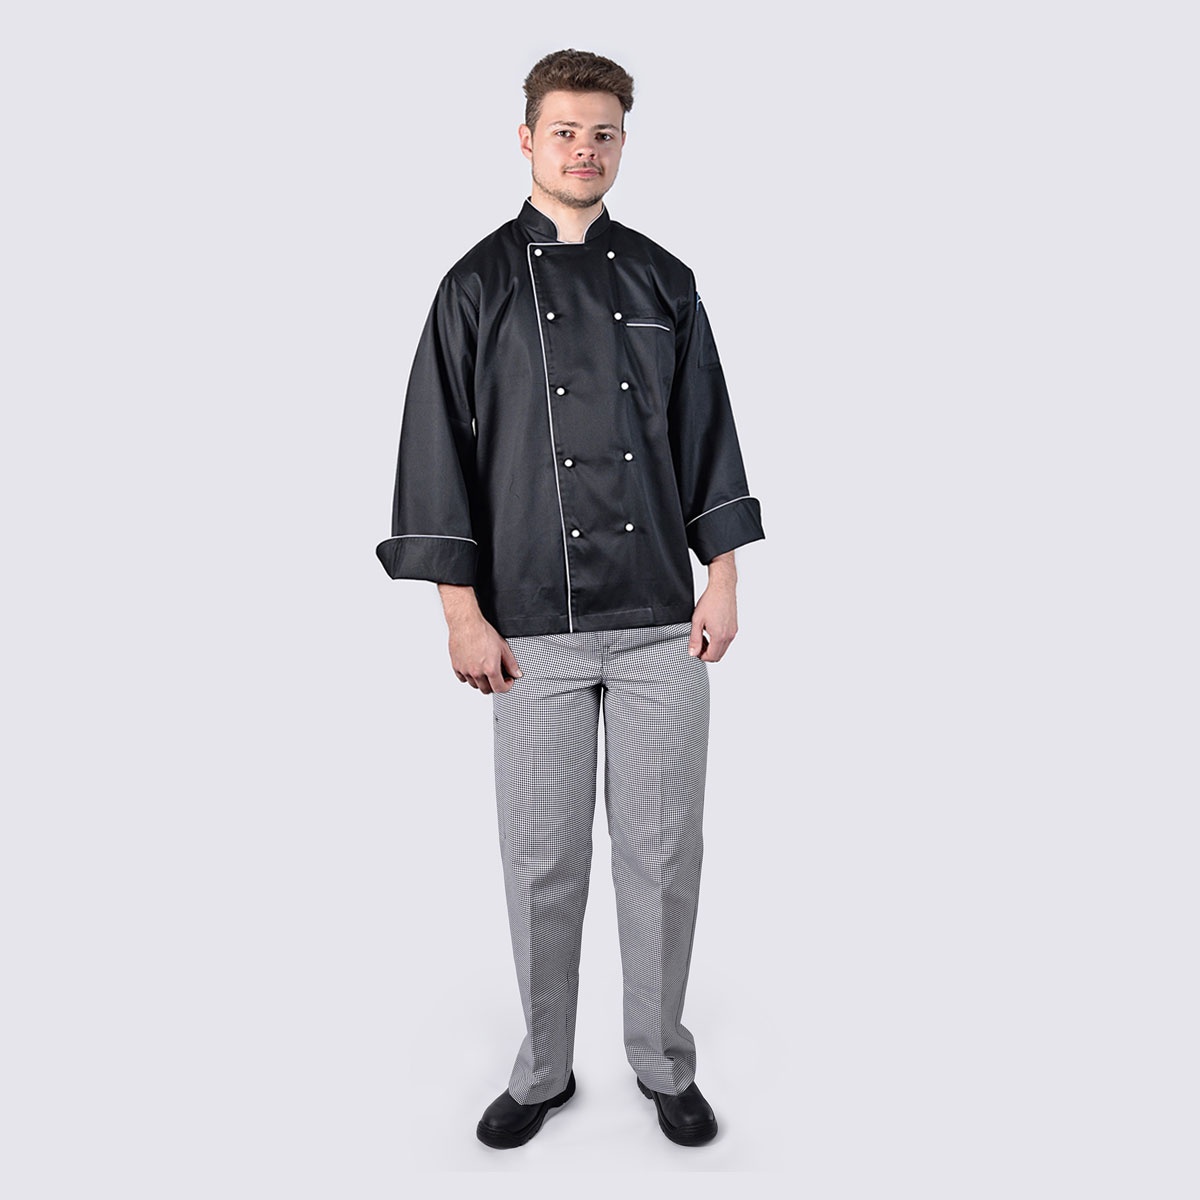 Black Chef Jacket Long Sleeve with White Piping and Checkered Pant